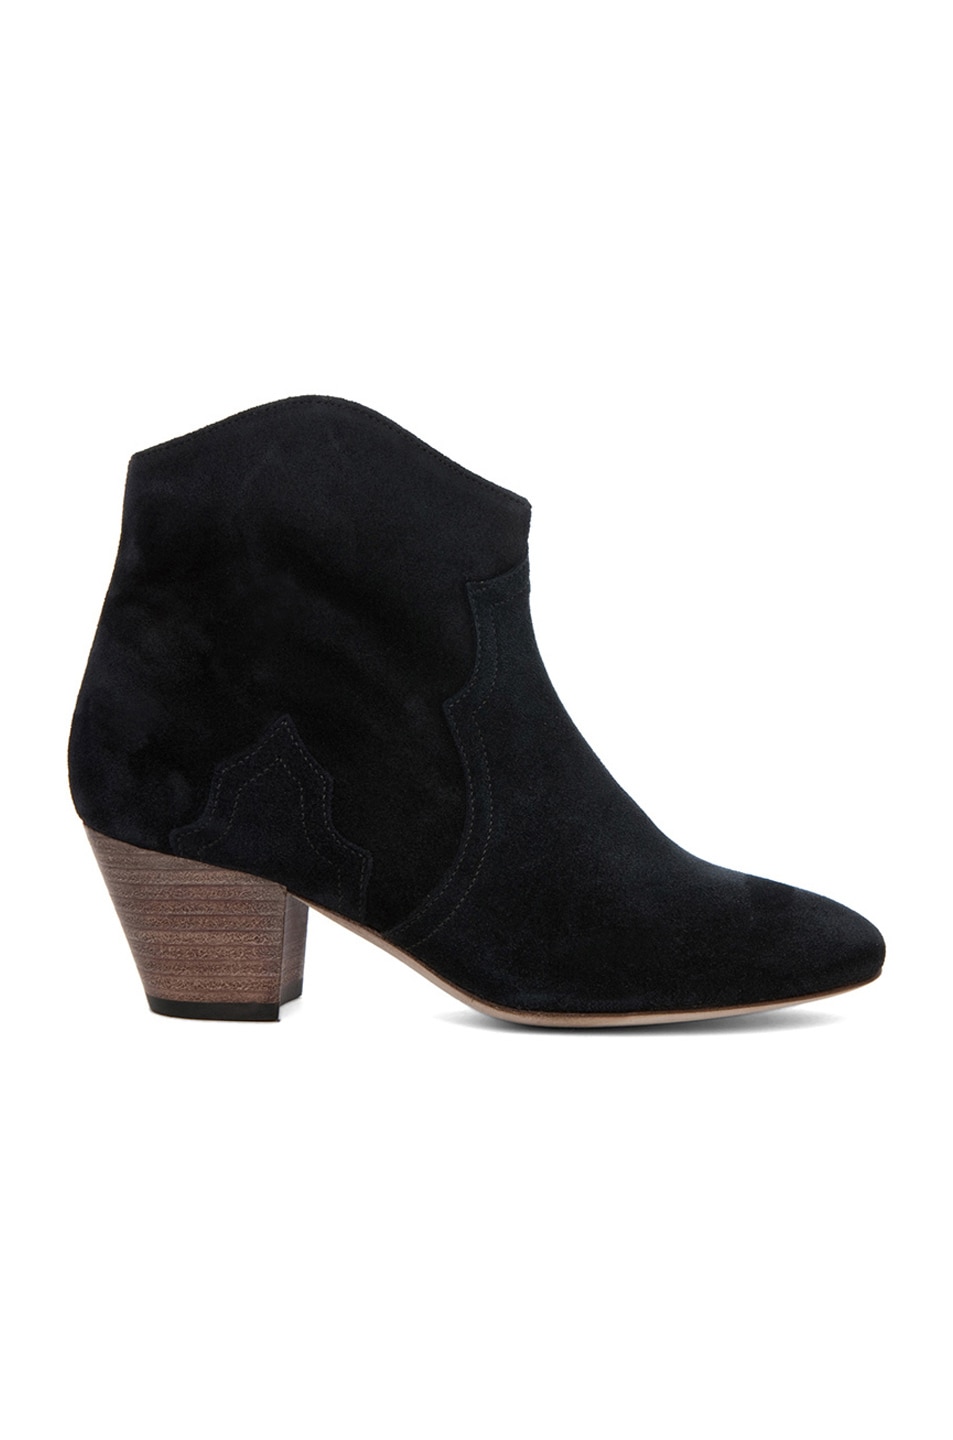 Image 1 of Isabel Marant Dicker Calfskin Velvet Leather Booties in Anthracite